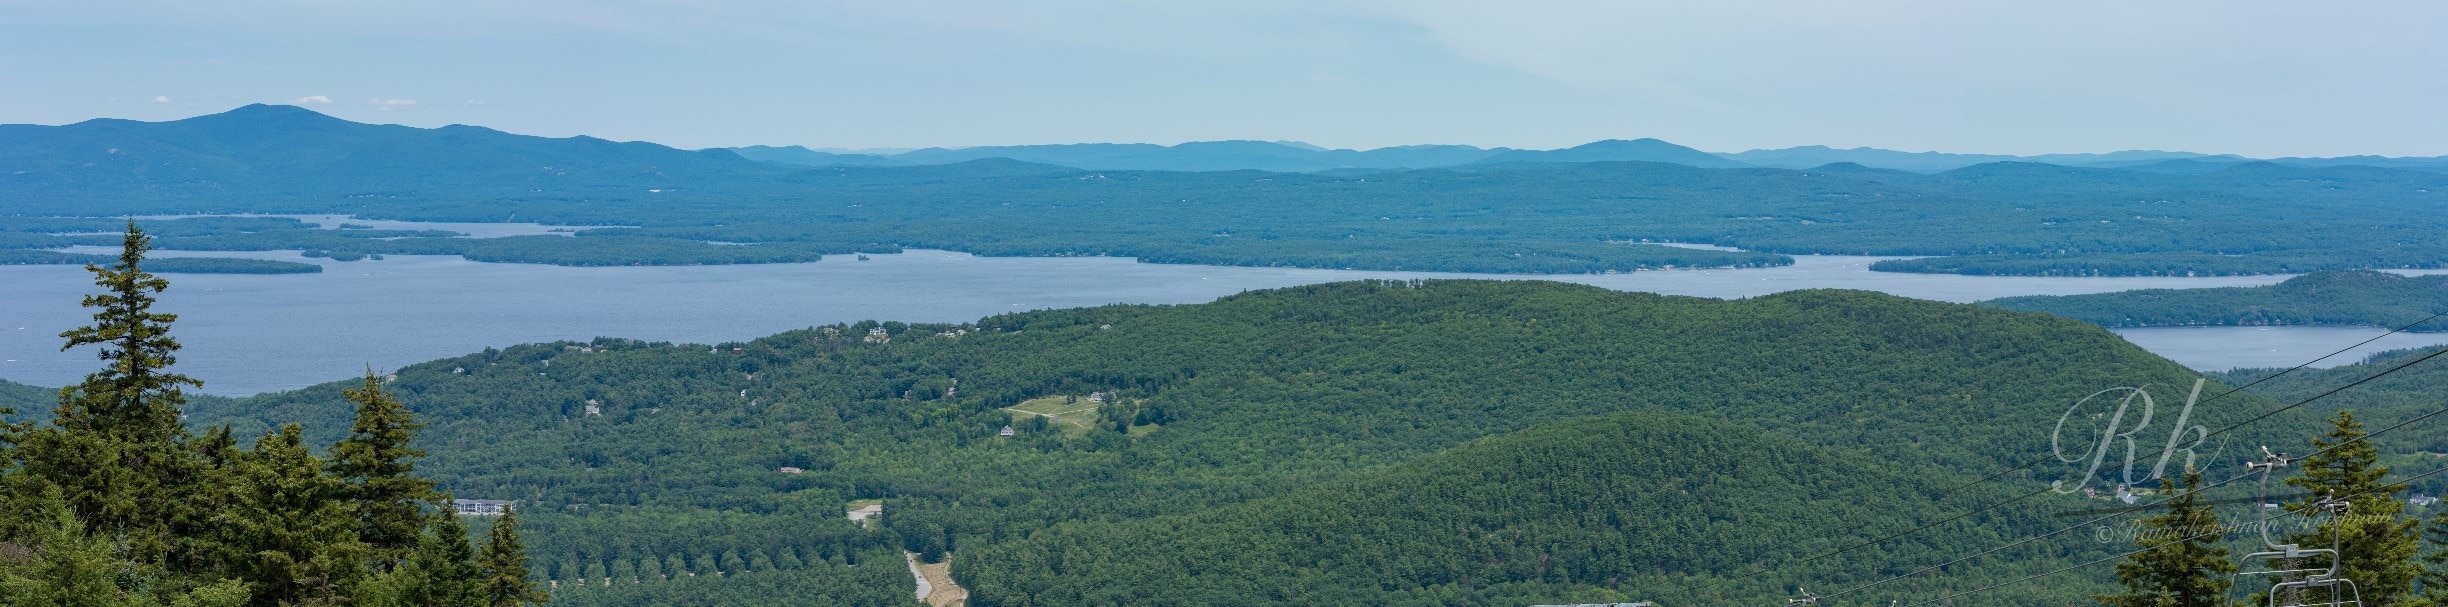 The View
Panoroma of 4 pictures taken from the top of Gunstock mountain.